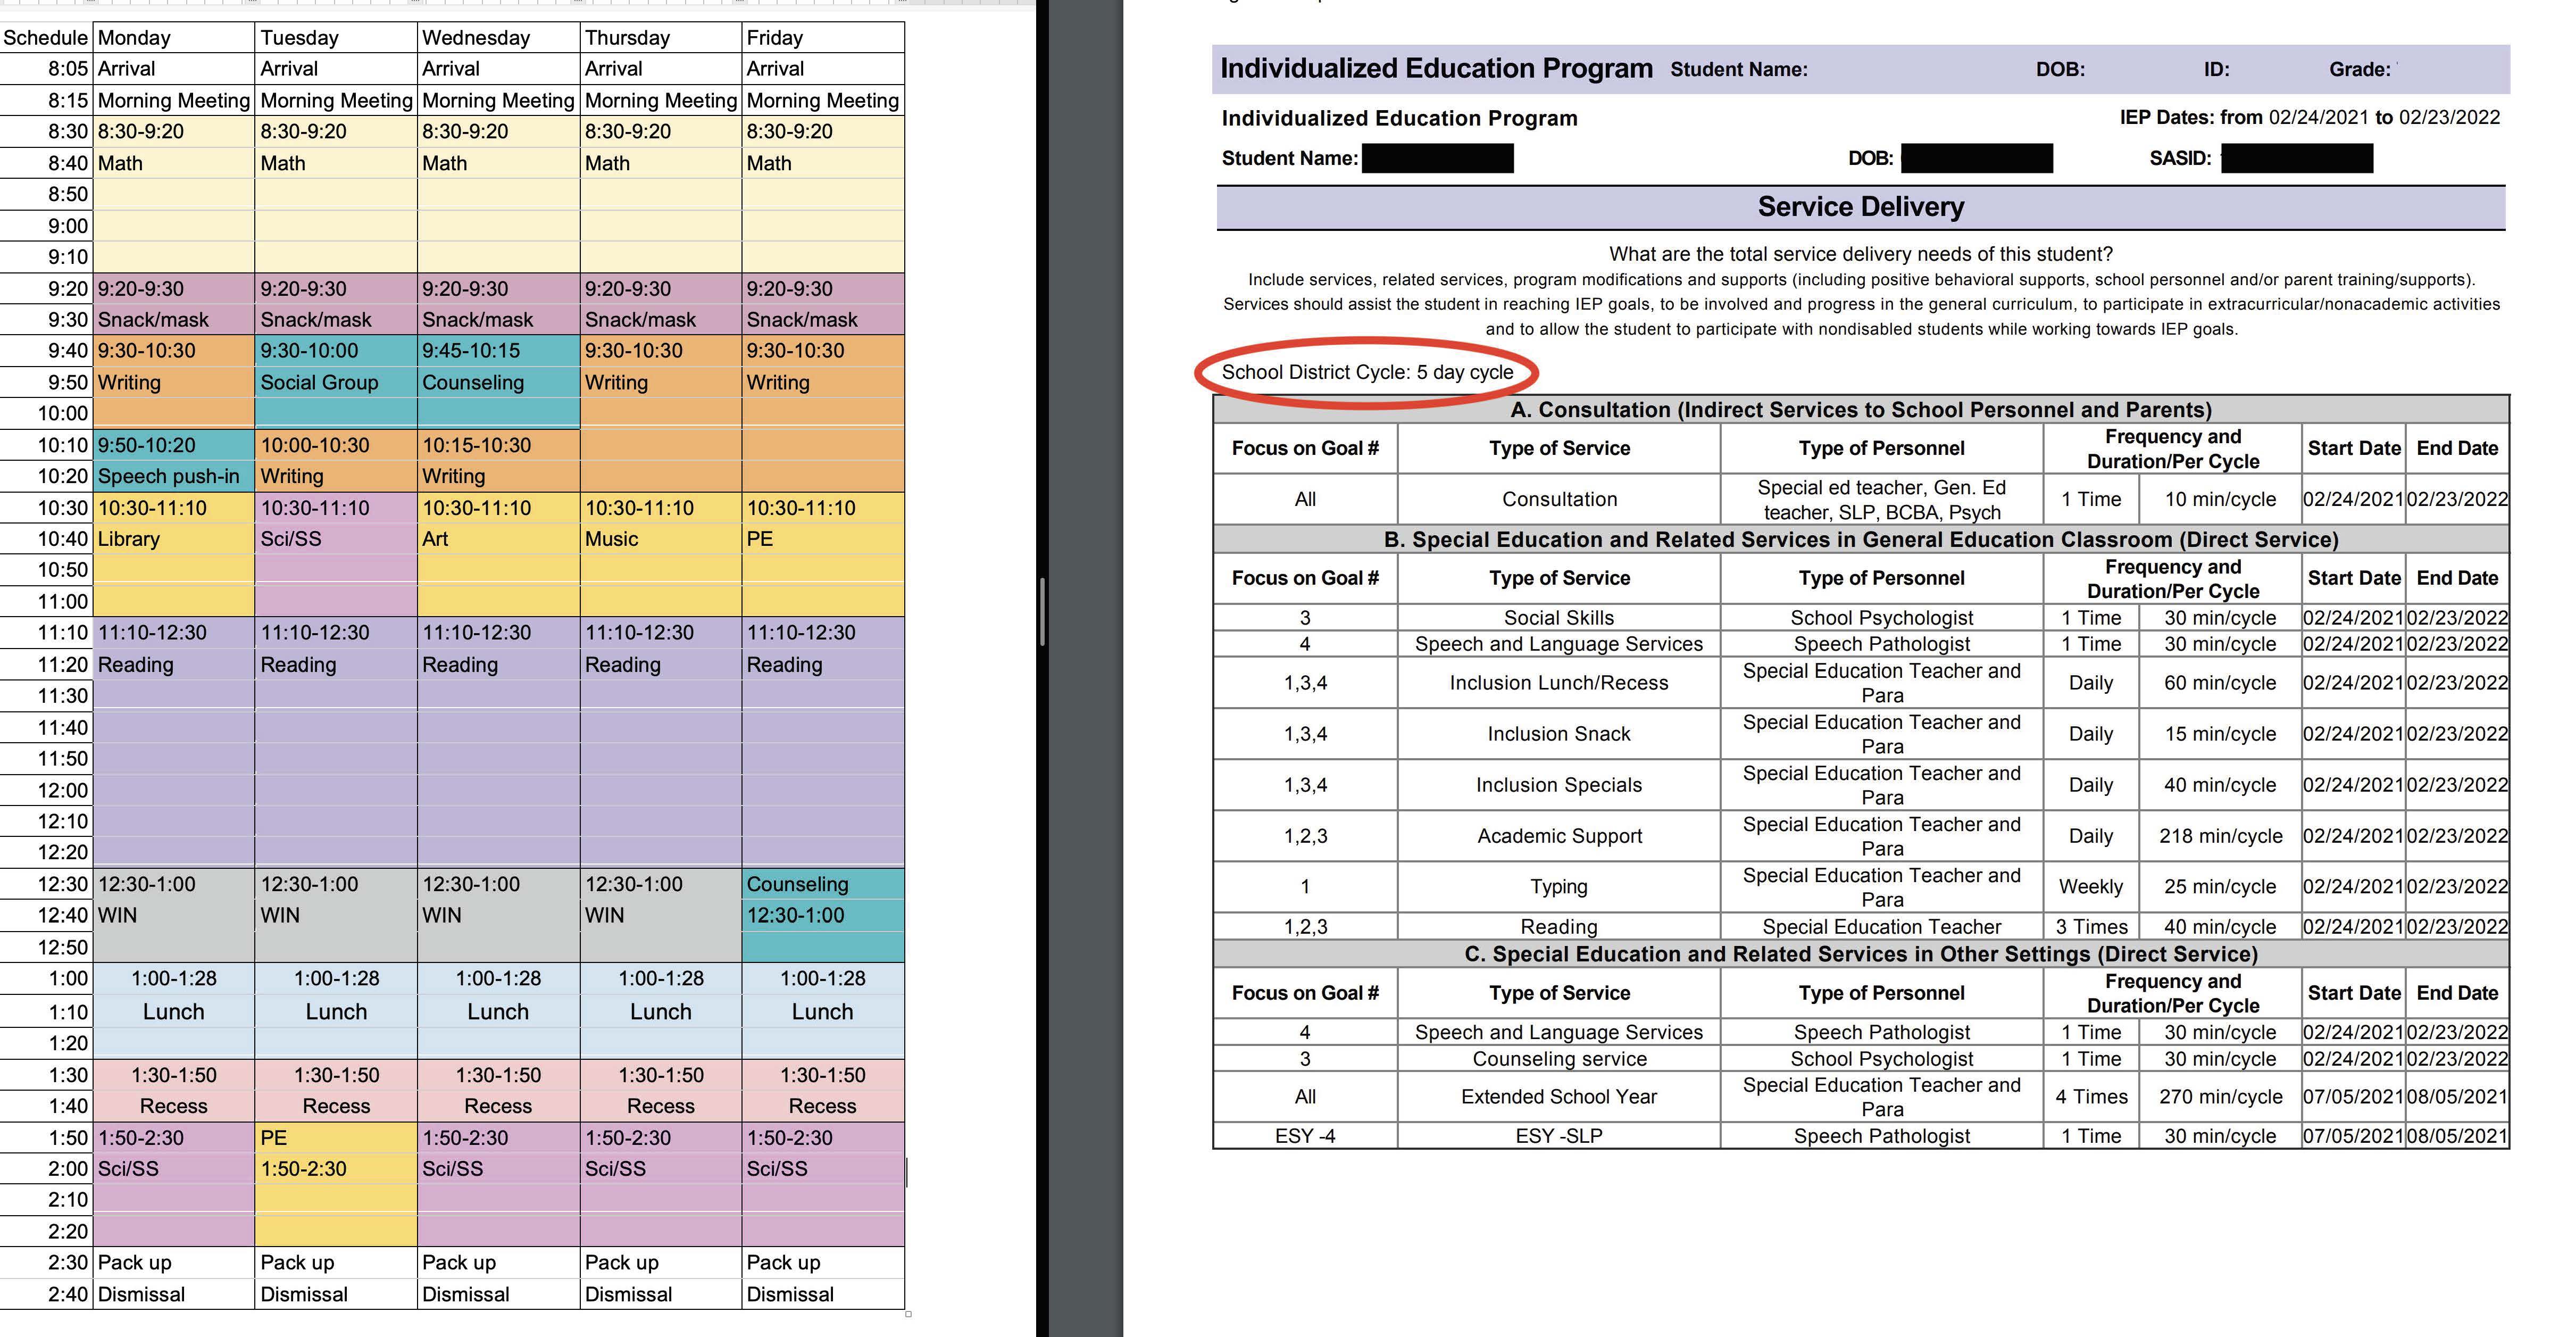 Image of sample special education schedule next to image of IEP service delivery grid.